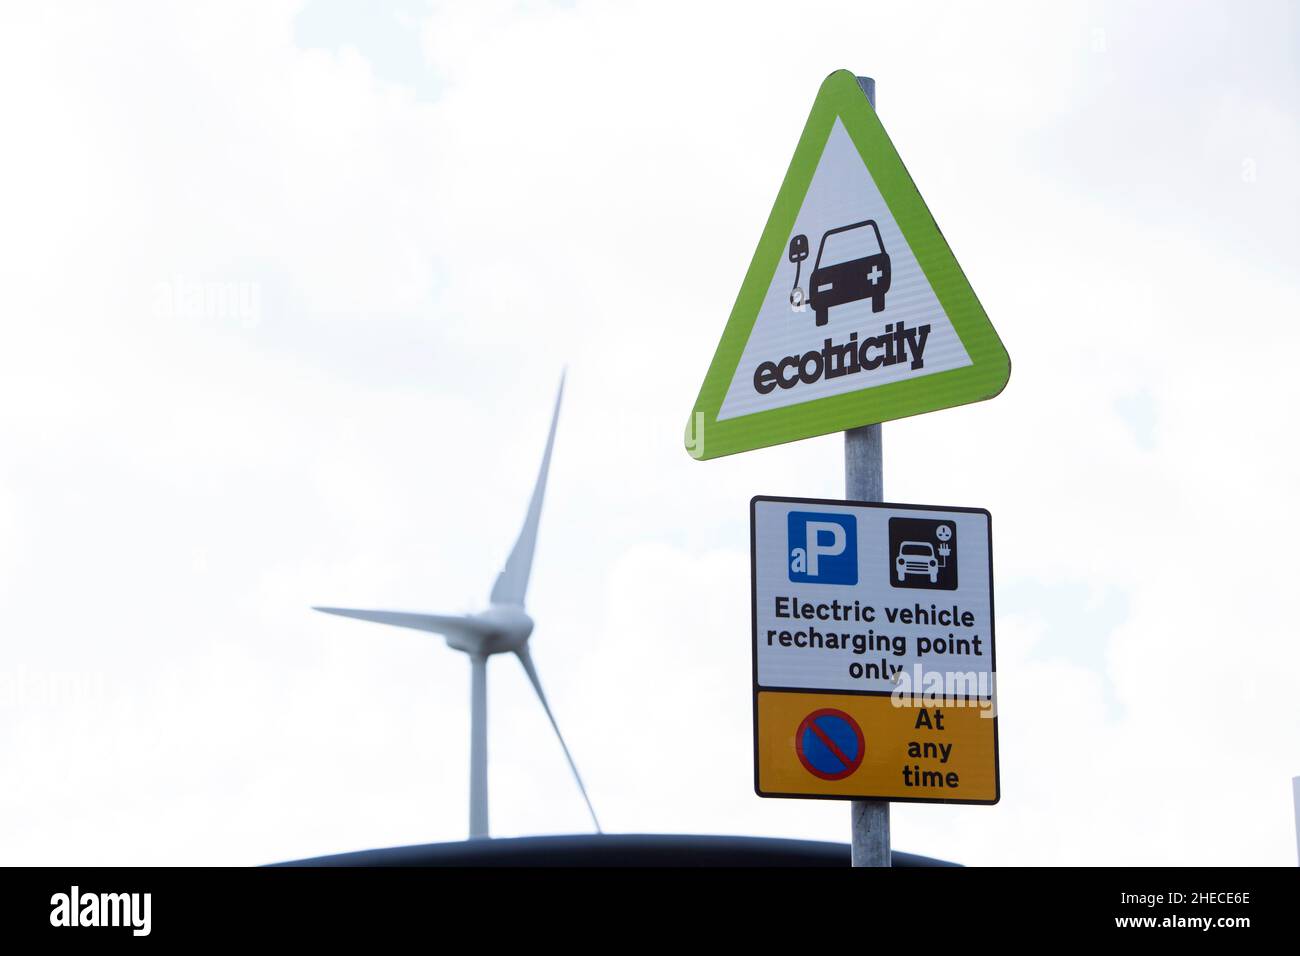 A sign denoting a charging point for electric vehicles situated near a wind turbine Stock Photo